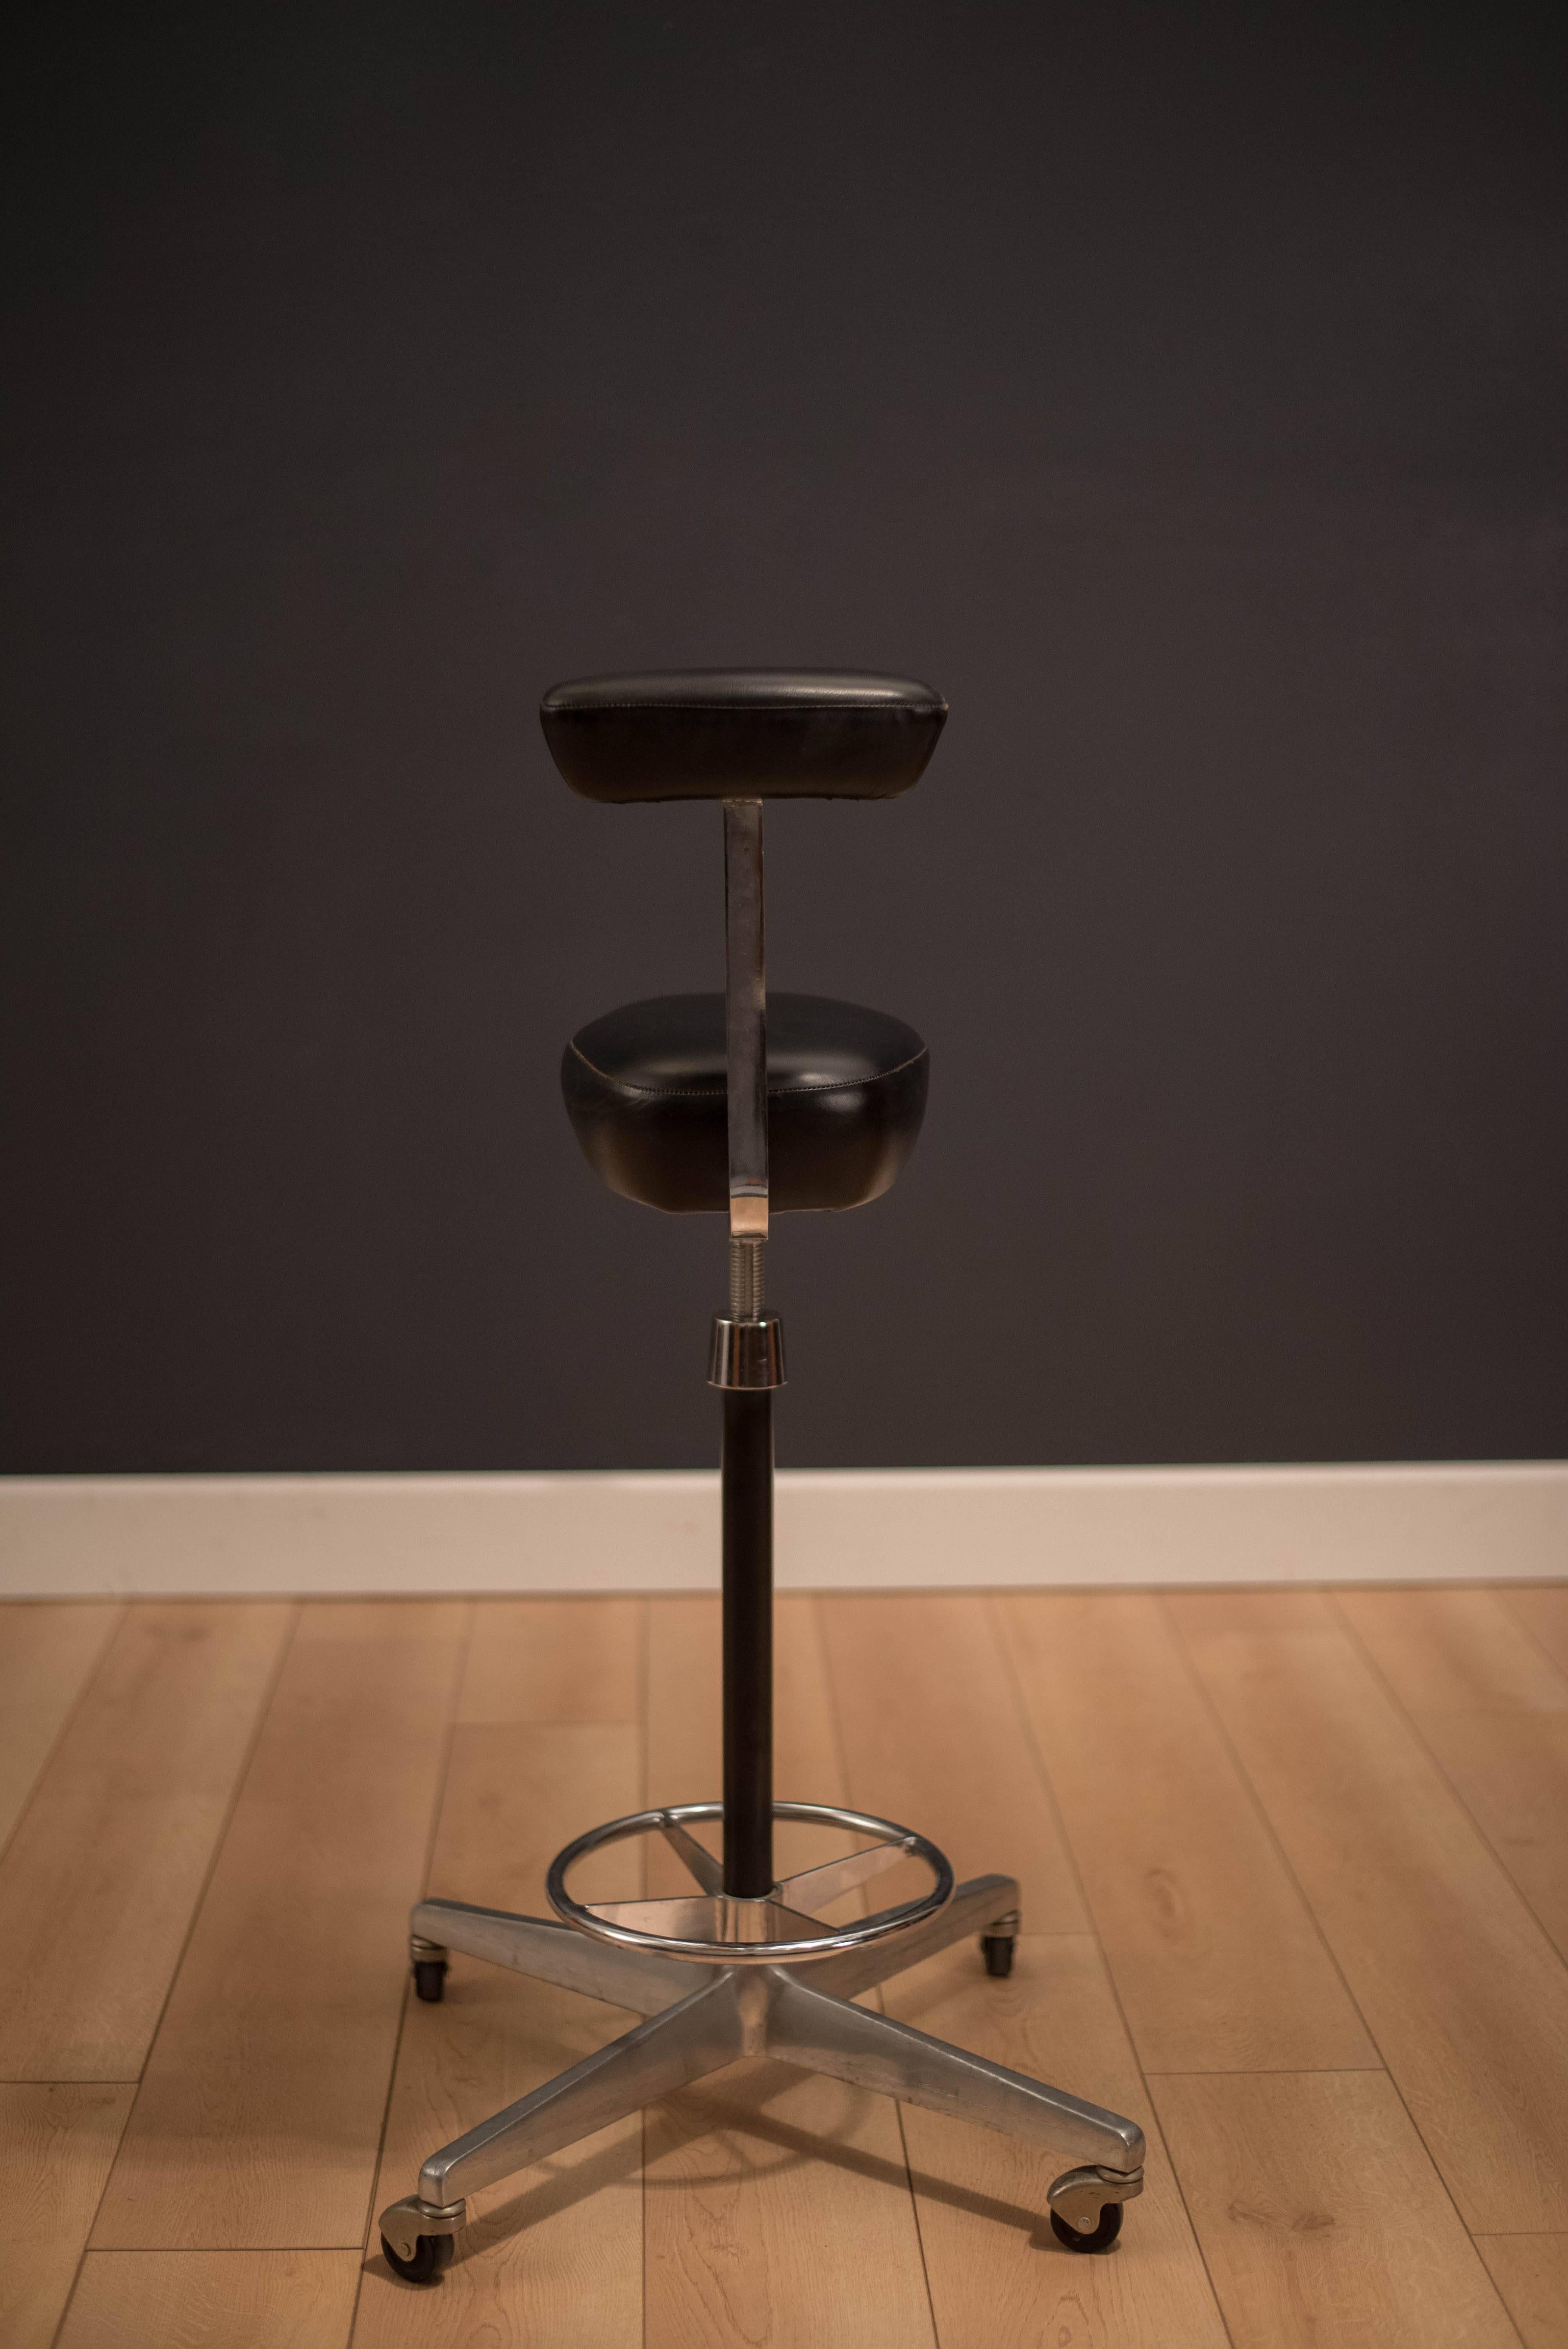 Mid-Century drafting stool by George Nelson and Robert Propst for Herman Miller. This piece sits on a heavy aluminum swivel base supported by casters. Black leather cushions are original.

Base: 21